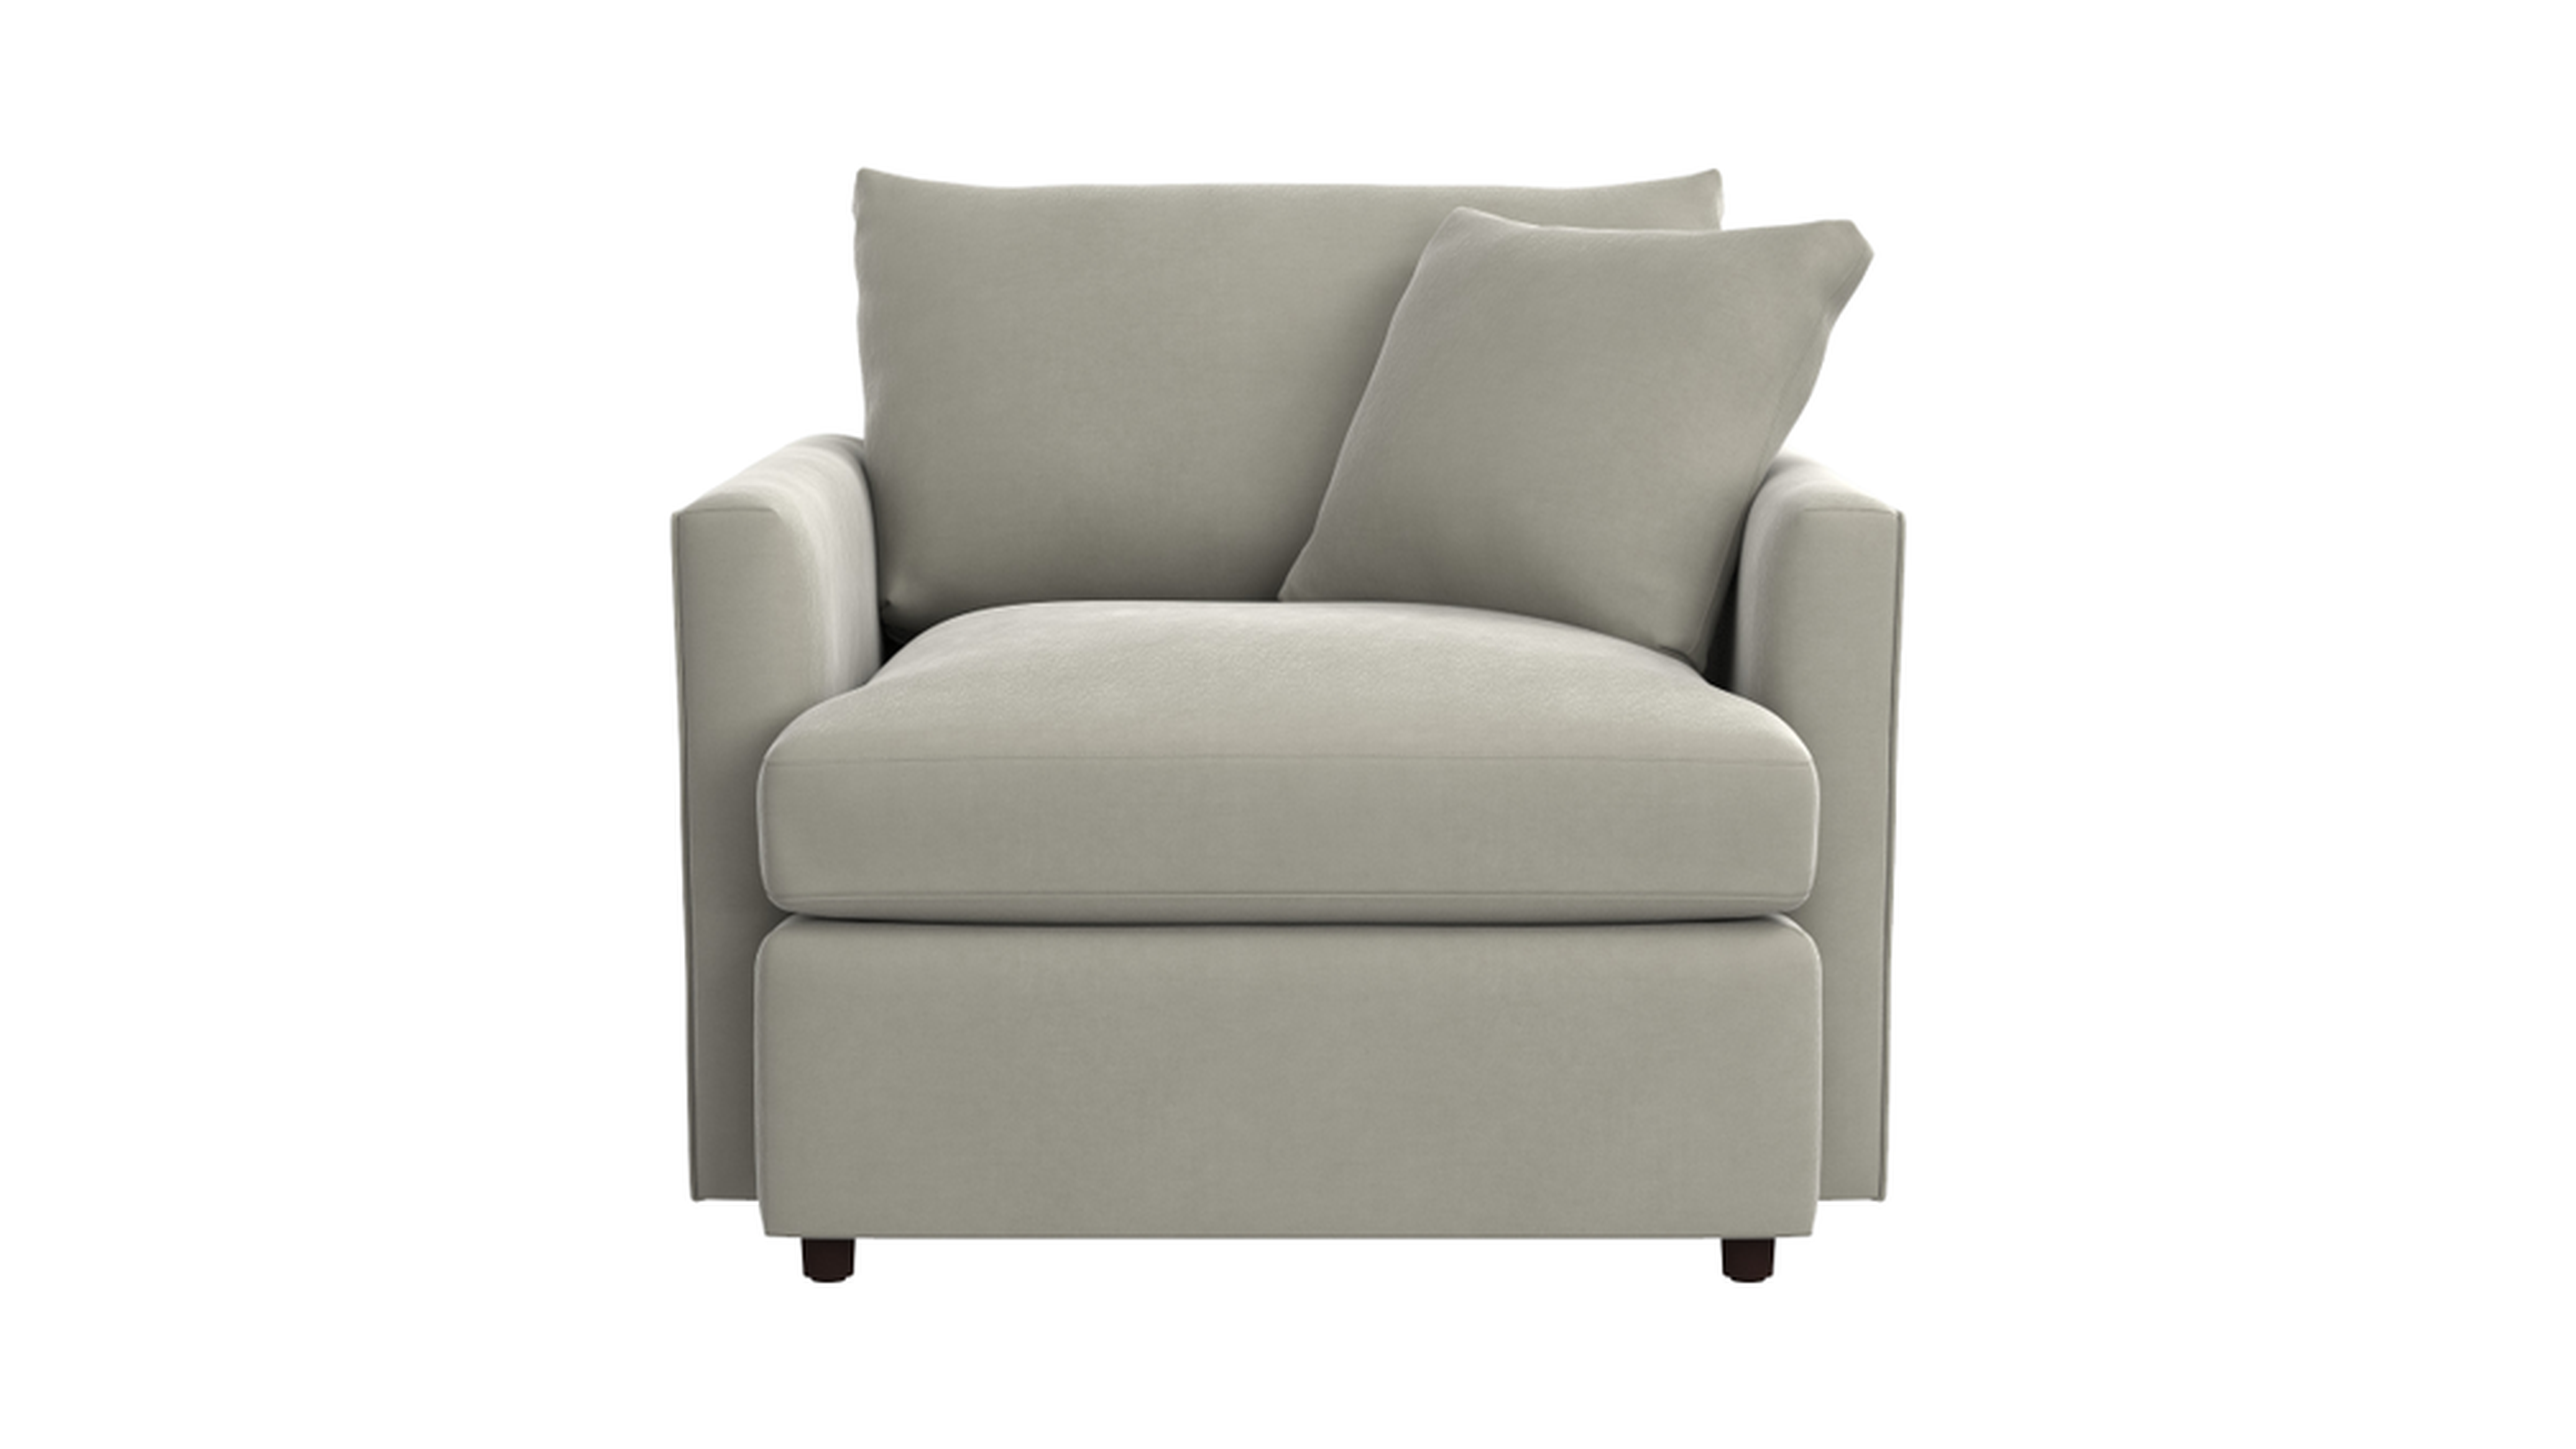 Lounge II Chair - Crate and Barrel